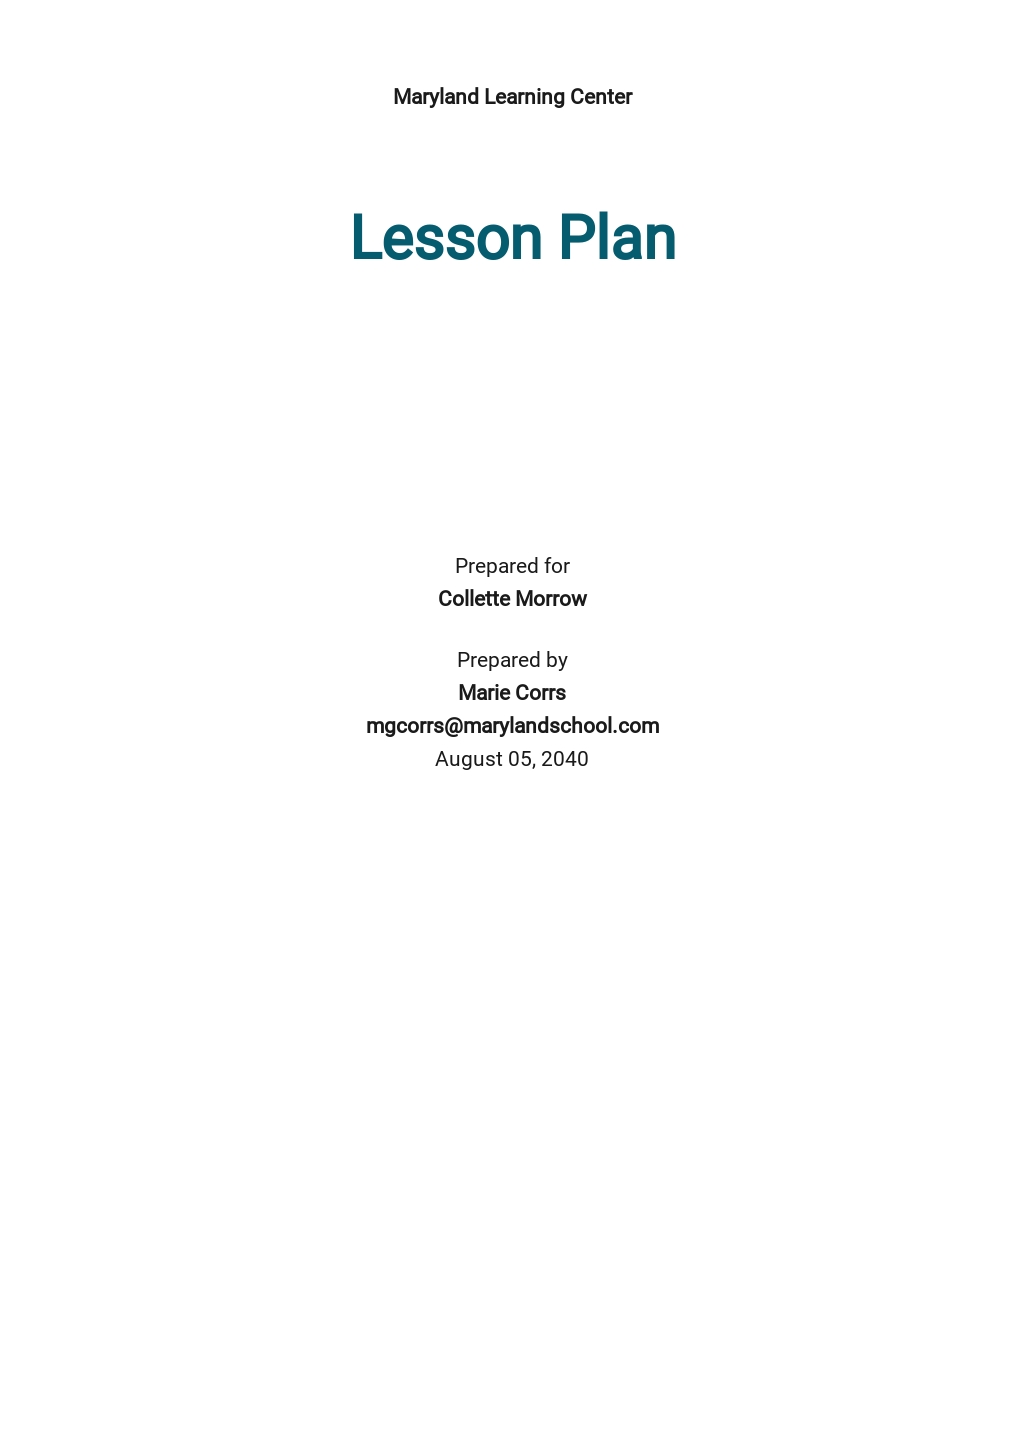 Daily Lesson Plan Template [Free PDF] - Google Docs, Word, Apple Pages ...